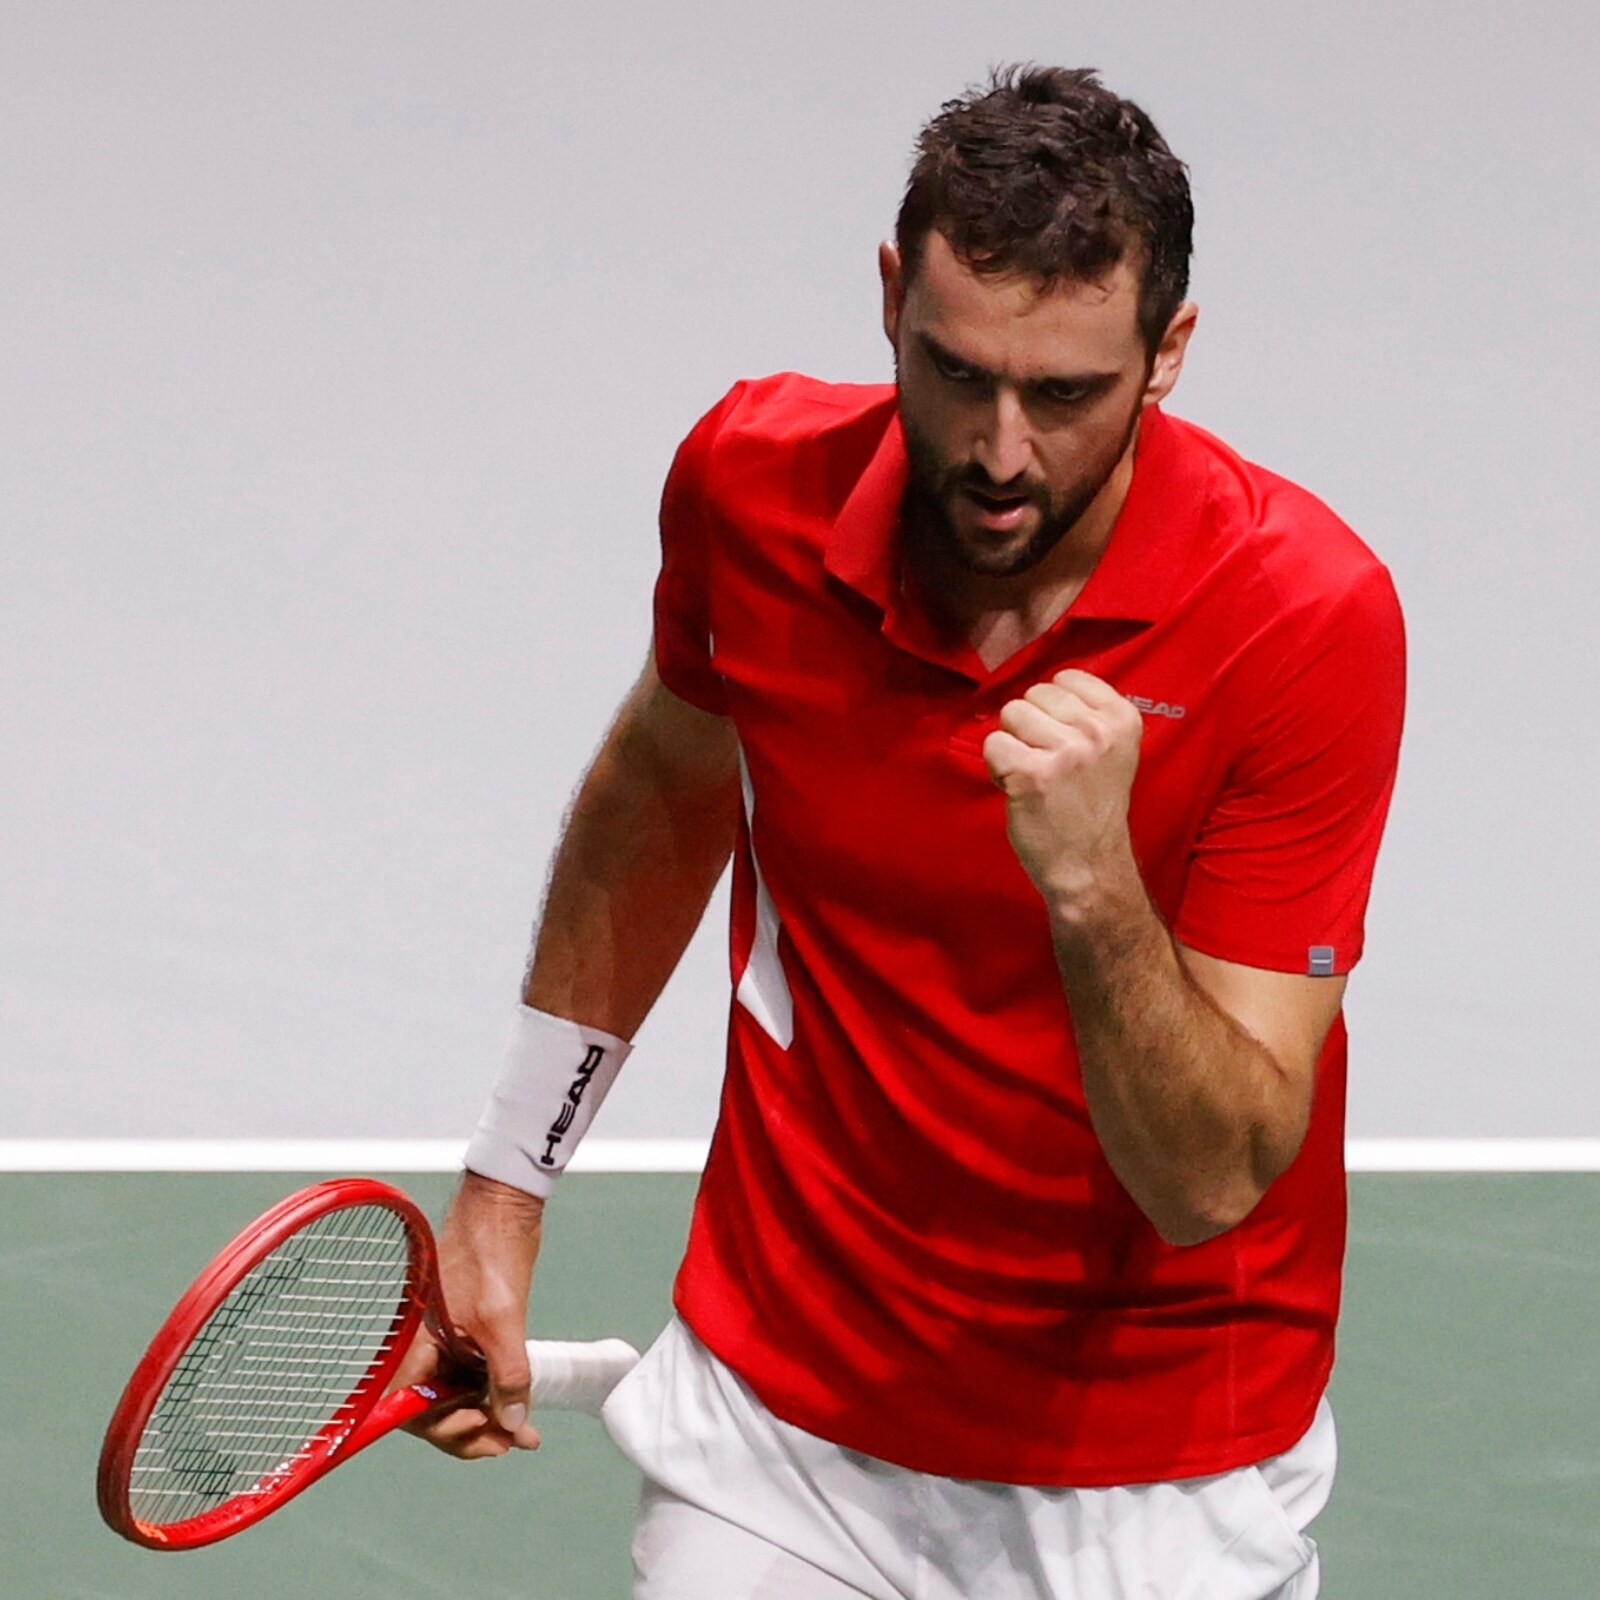 Marin Cilic Advances to Semi-finals, Karen Khachanov Knocked Out in Adelaide